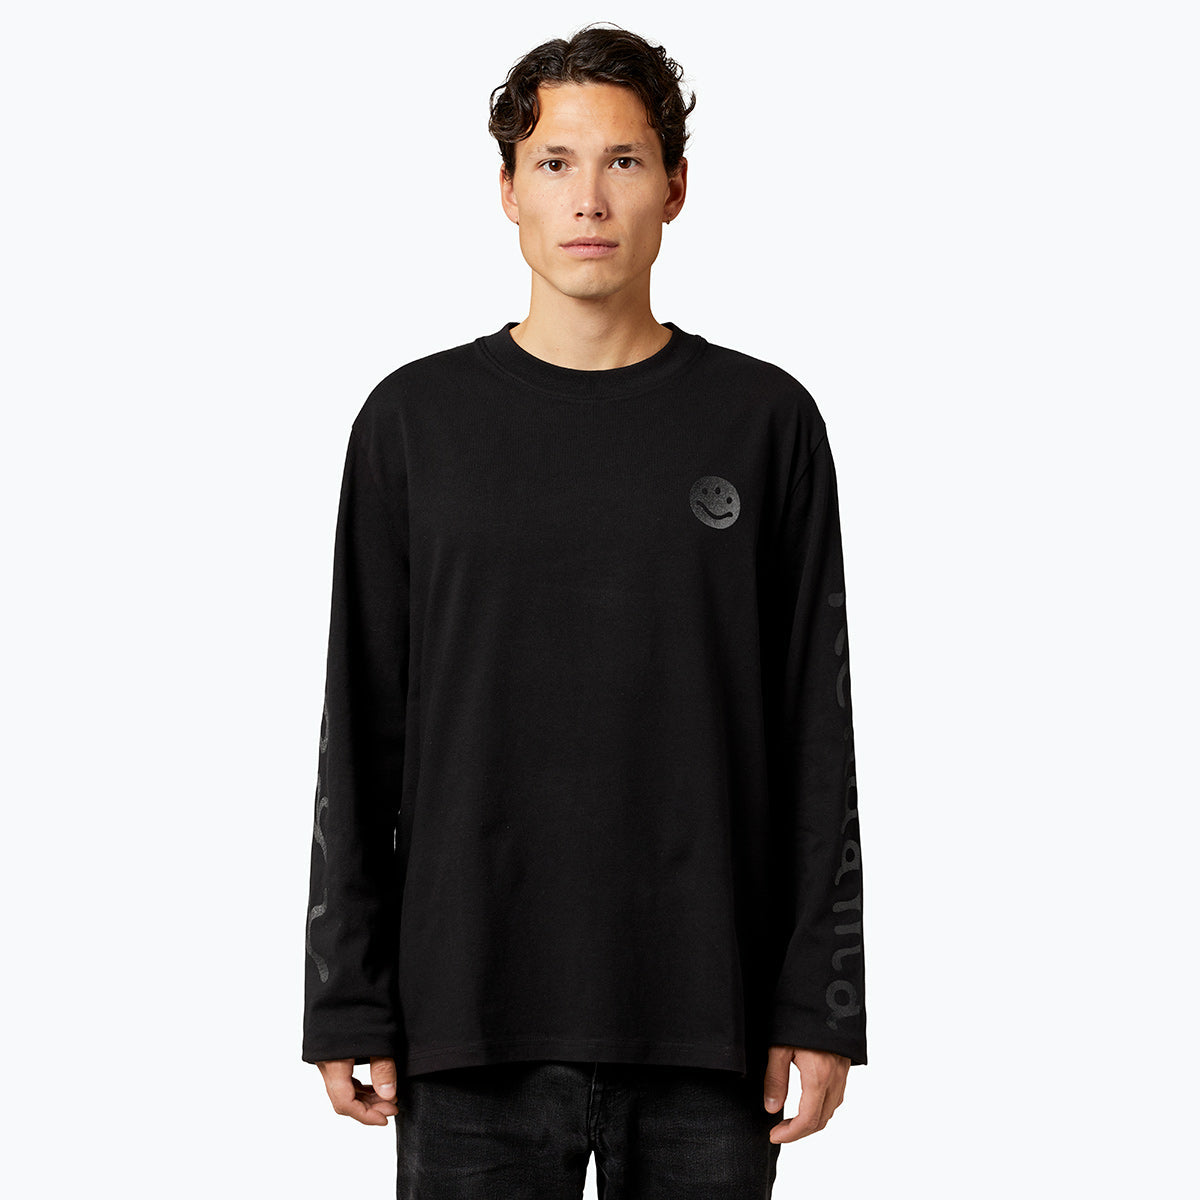 KROM PLAY LIFE COLLECTION LONG SLEEVE BLACK MODEL